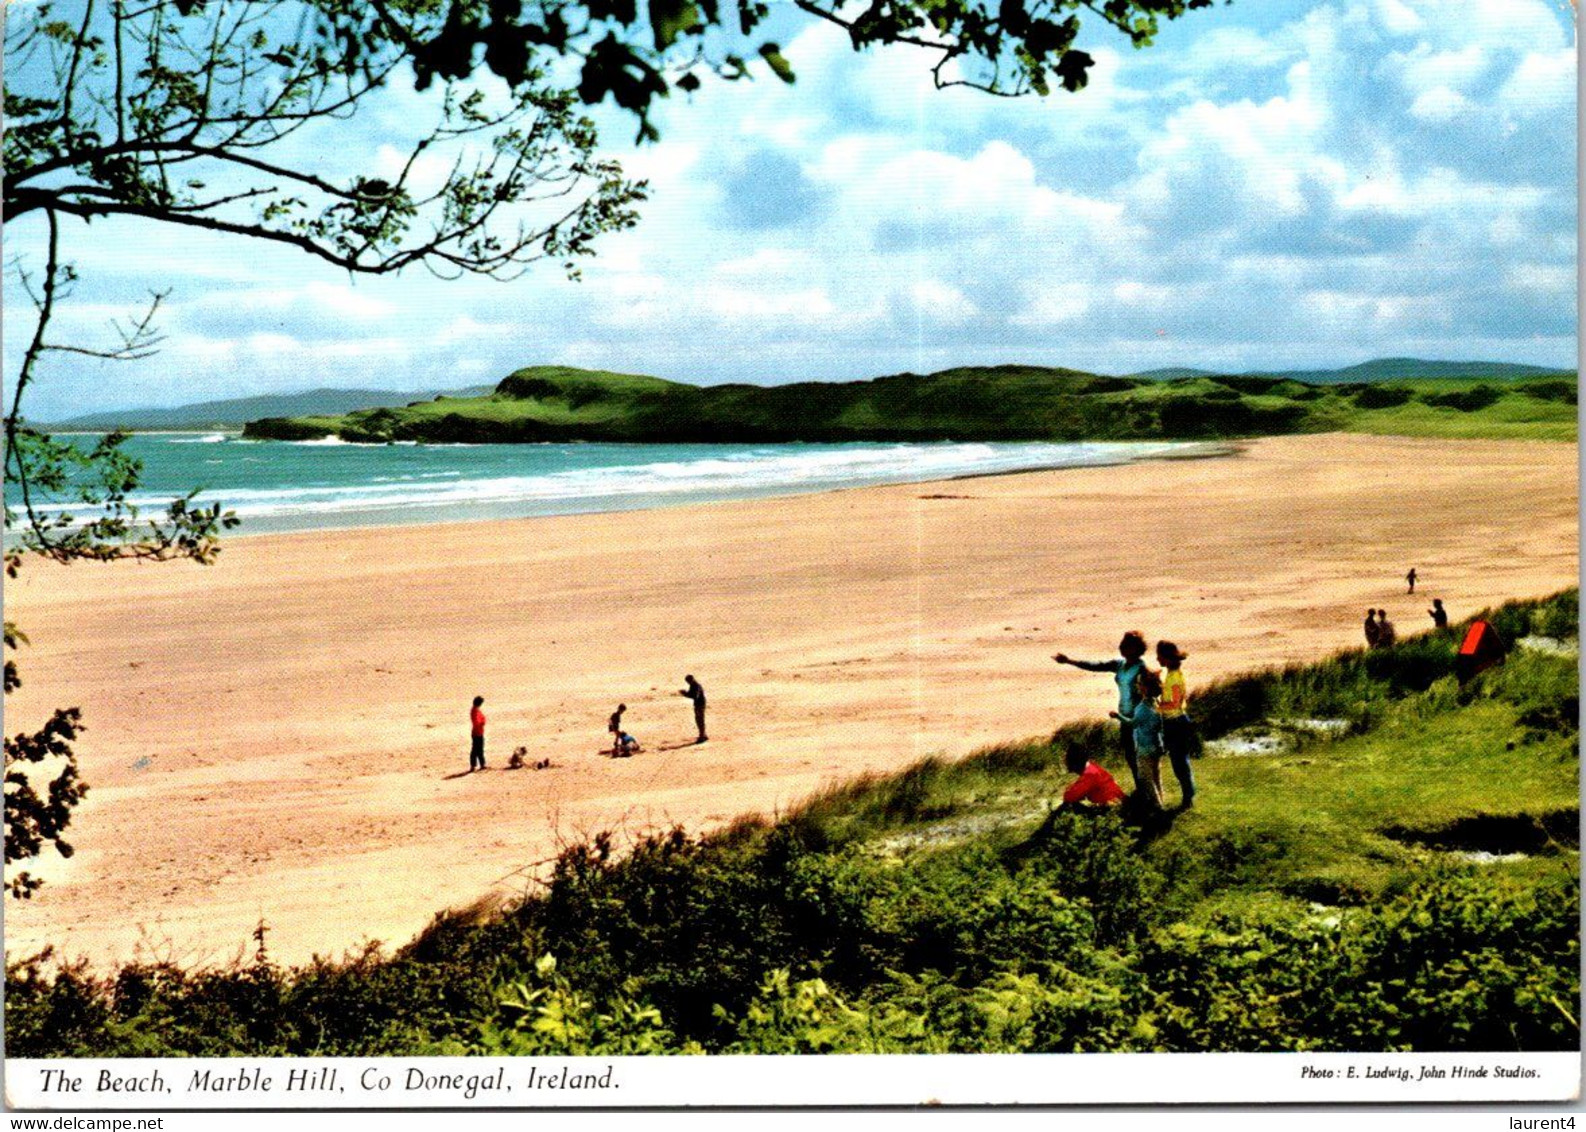 (1 G 25) Ireland - Co Donegal - Marble Hill Beach - Donegal